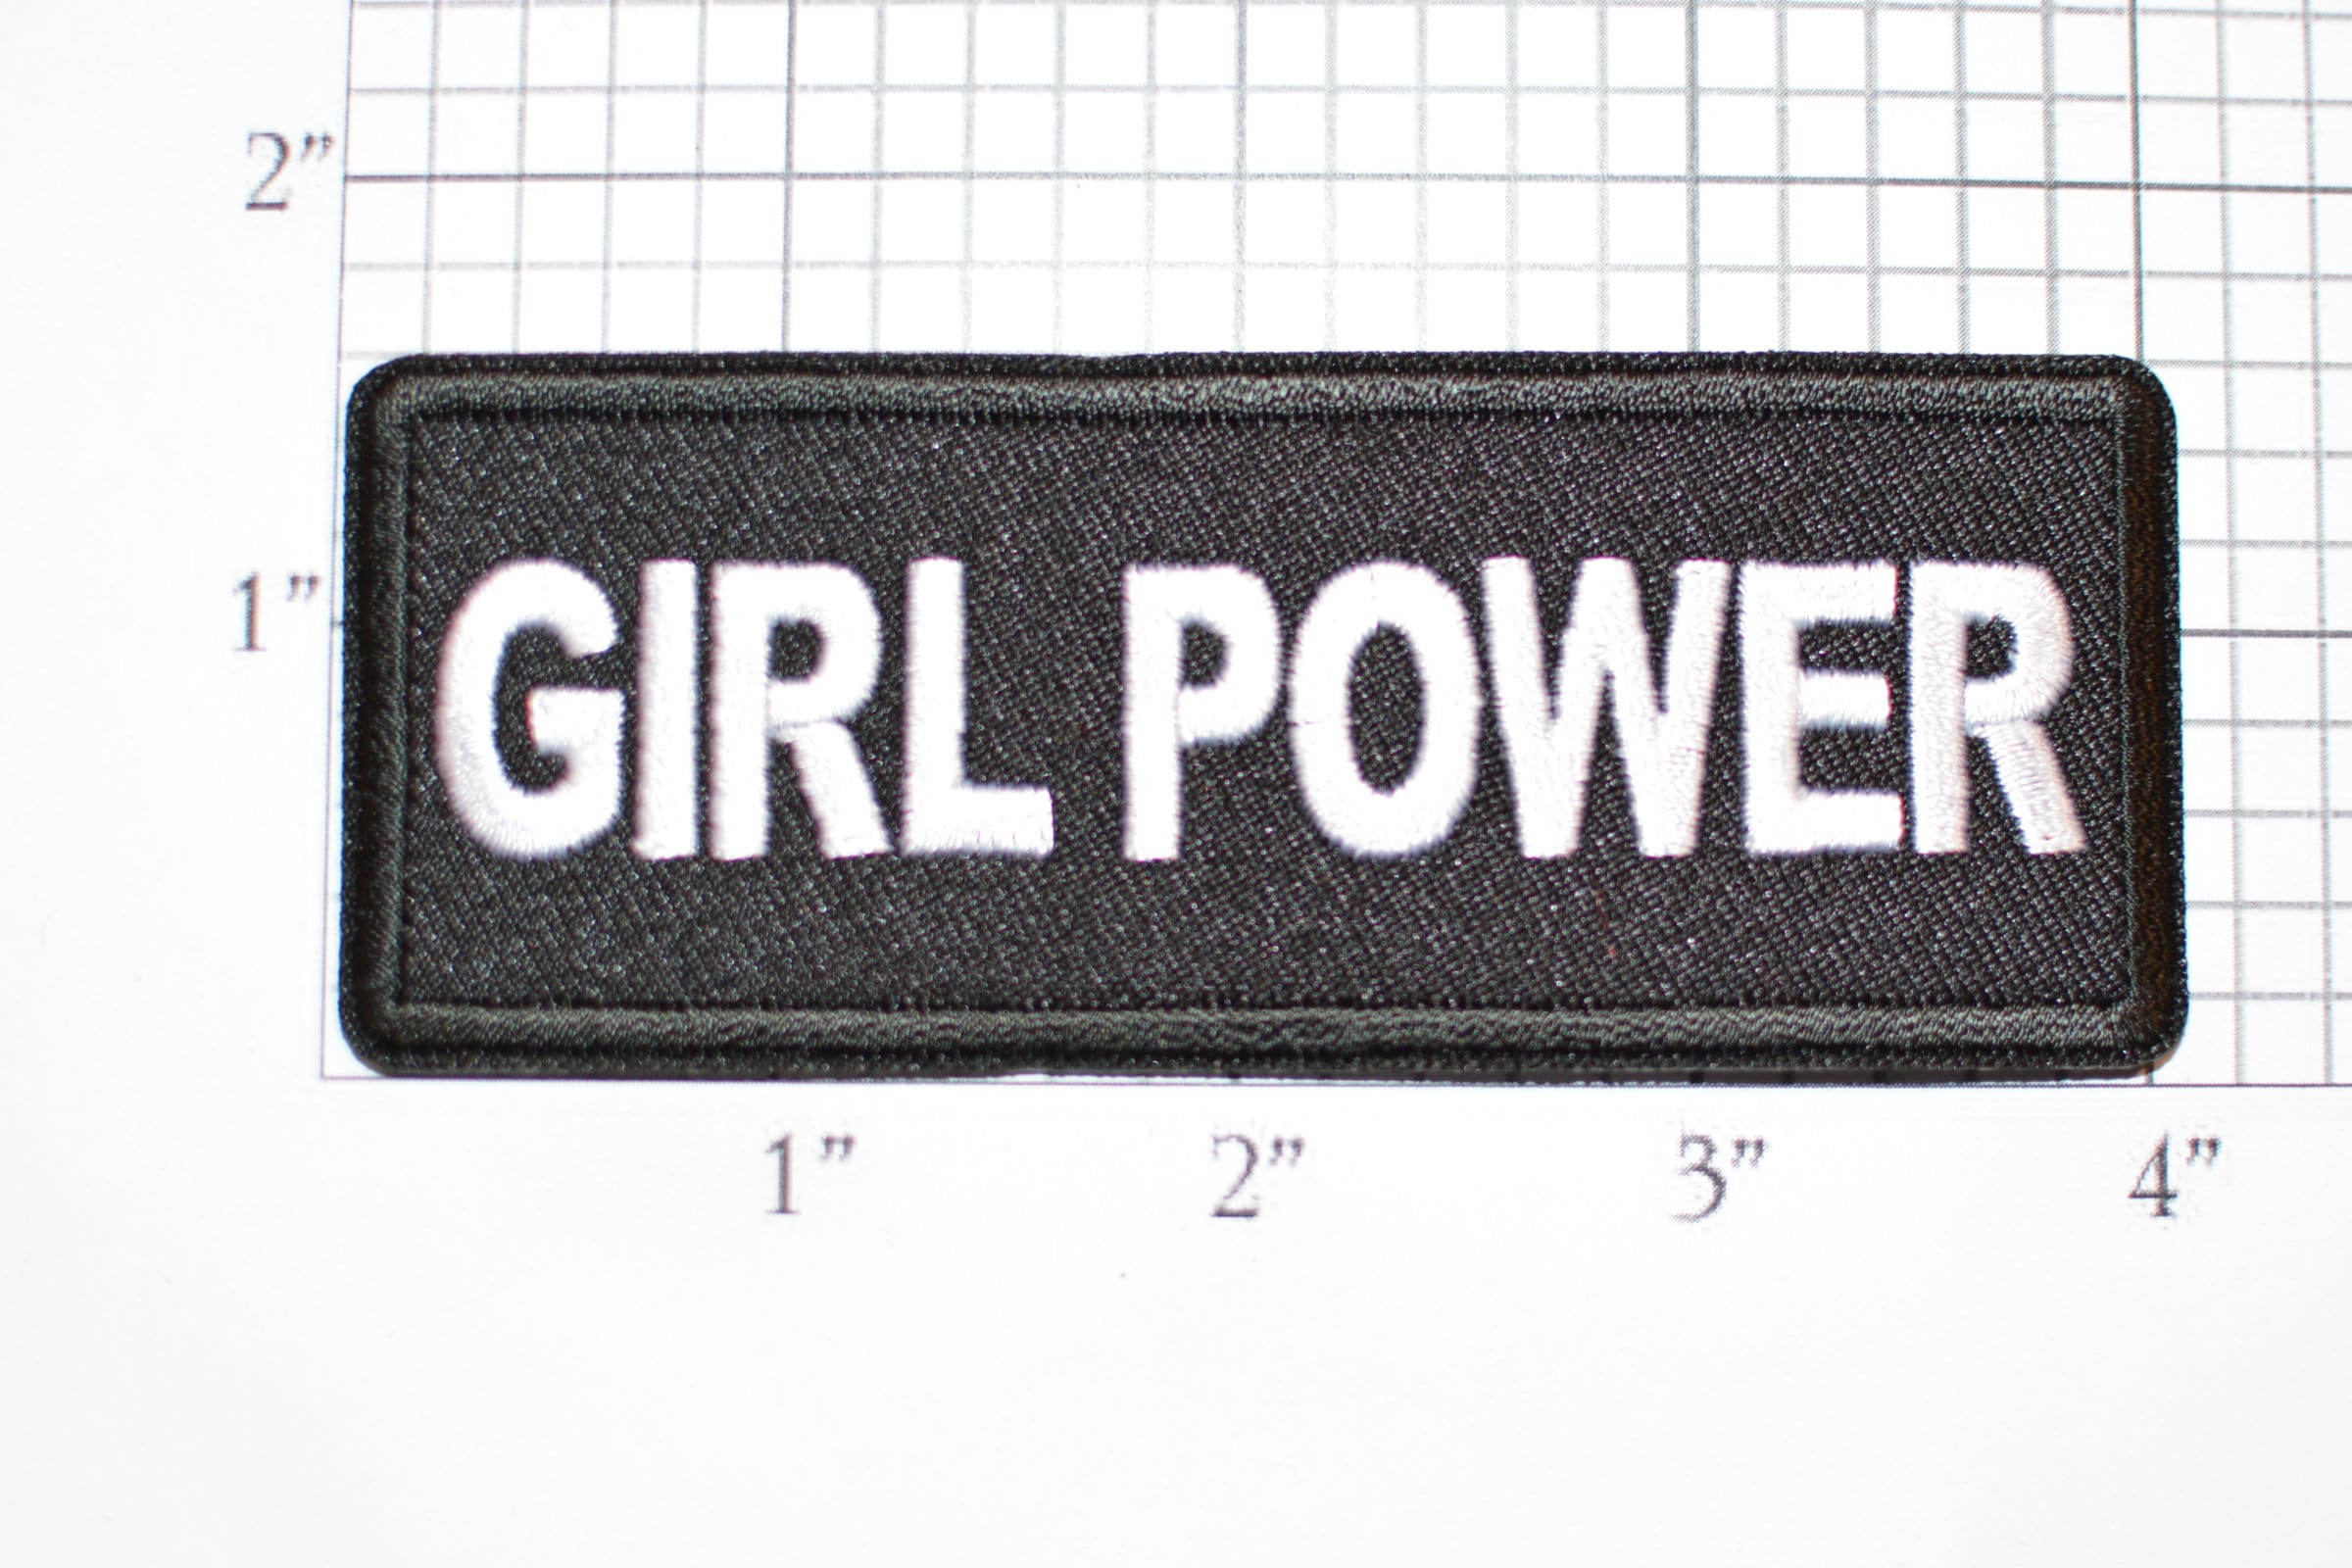 PARCHES PARA ROPA : POWER GIRL